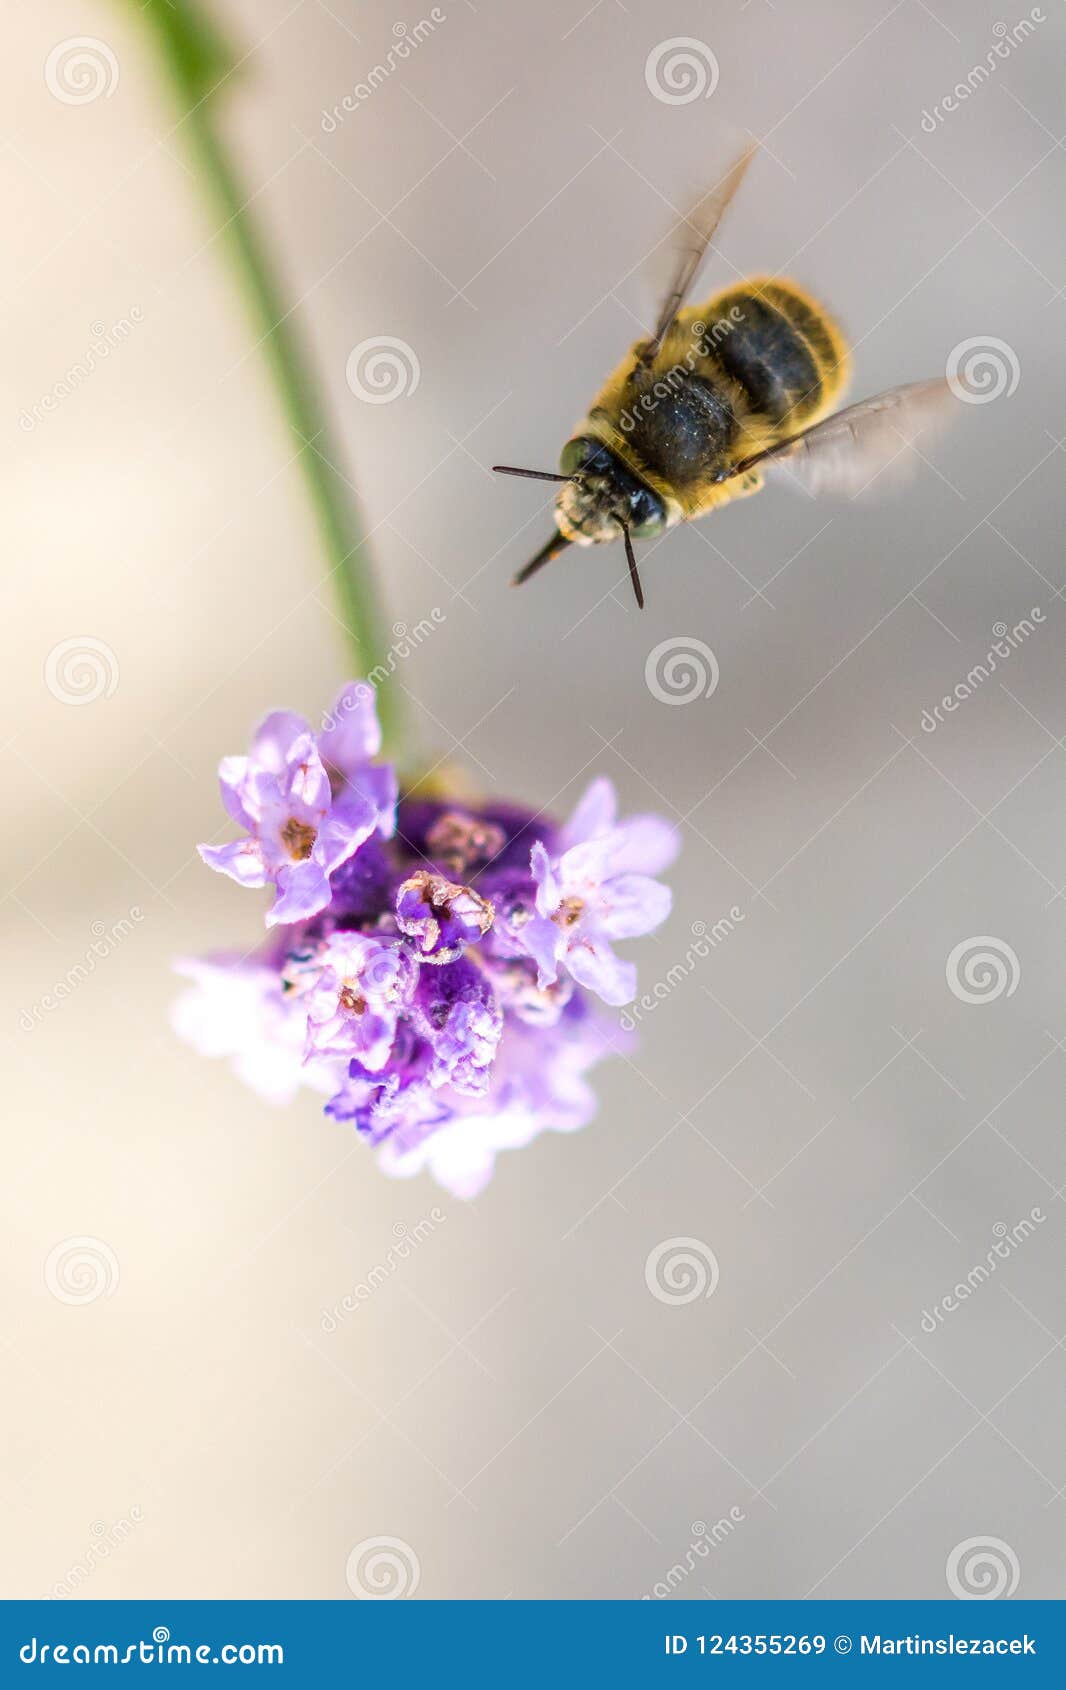 Bee on the flower. Small useful insect is working and making honey. Honeybee with wing on the blossom. Spring at countryside of meadow.